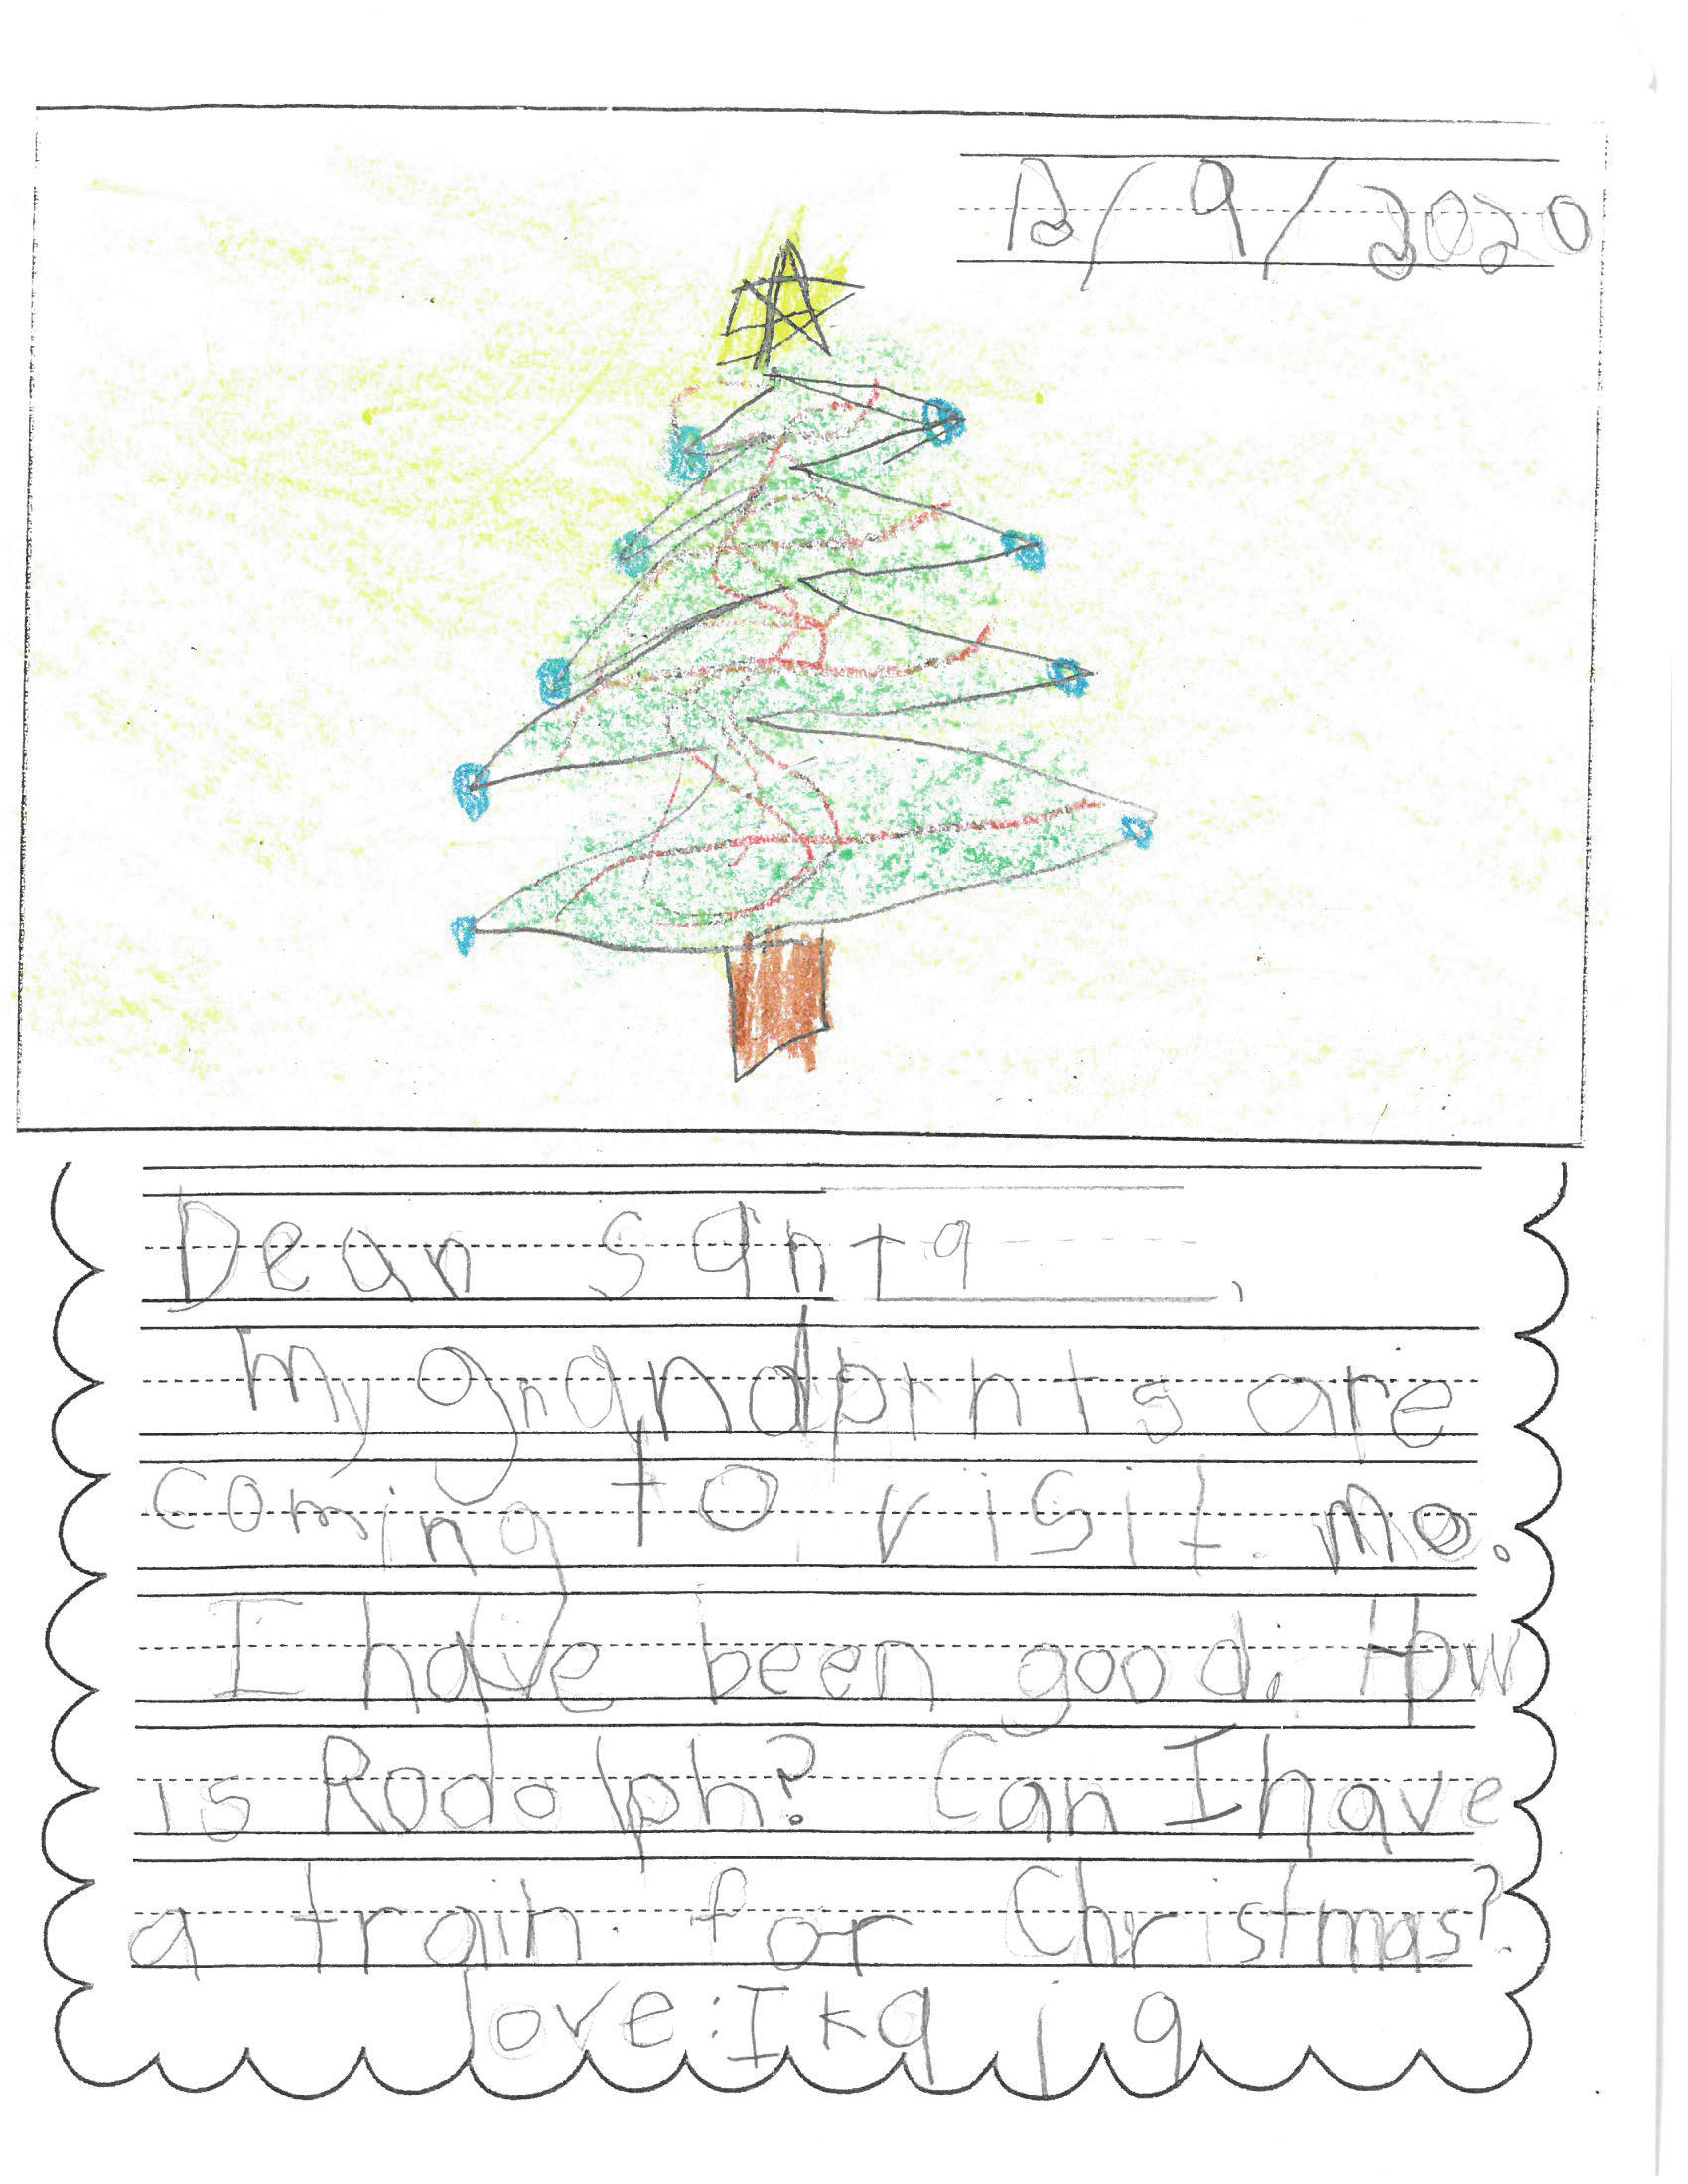 A letter to Santa from a first grade student at Paul Banks Elementary School. (Photo courtesy Megan Fowler)